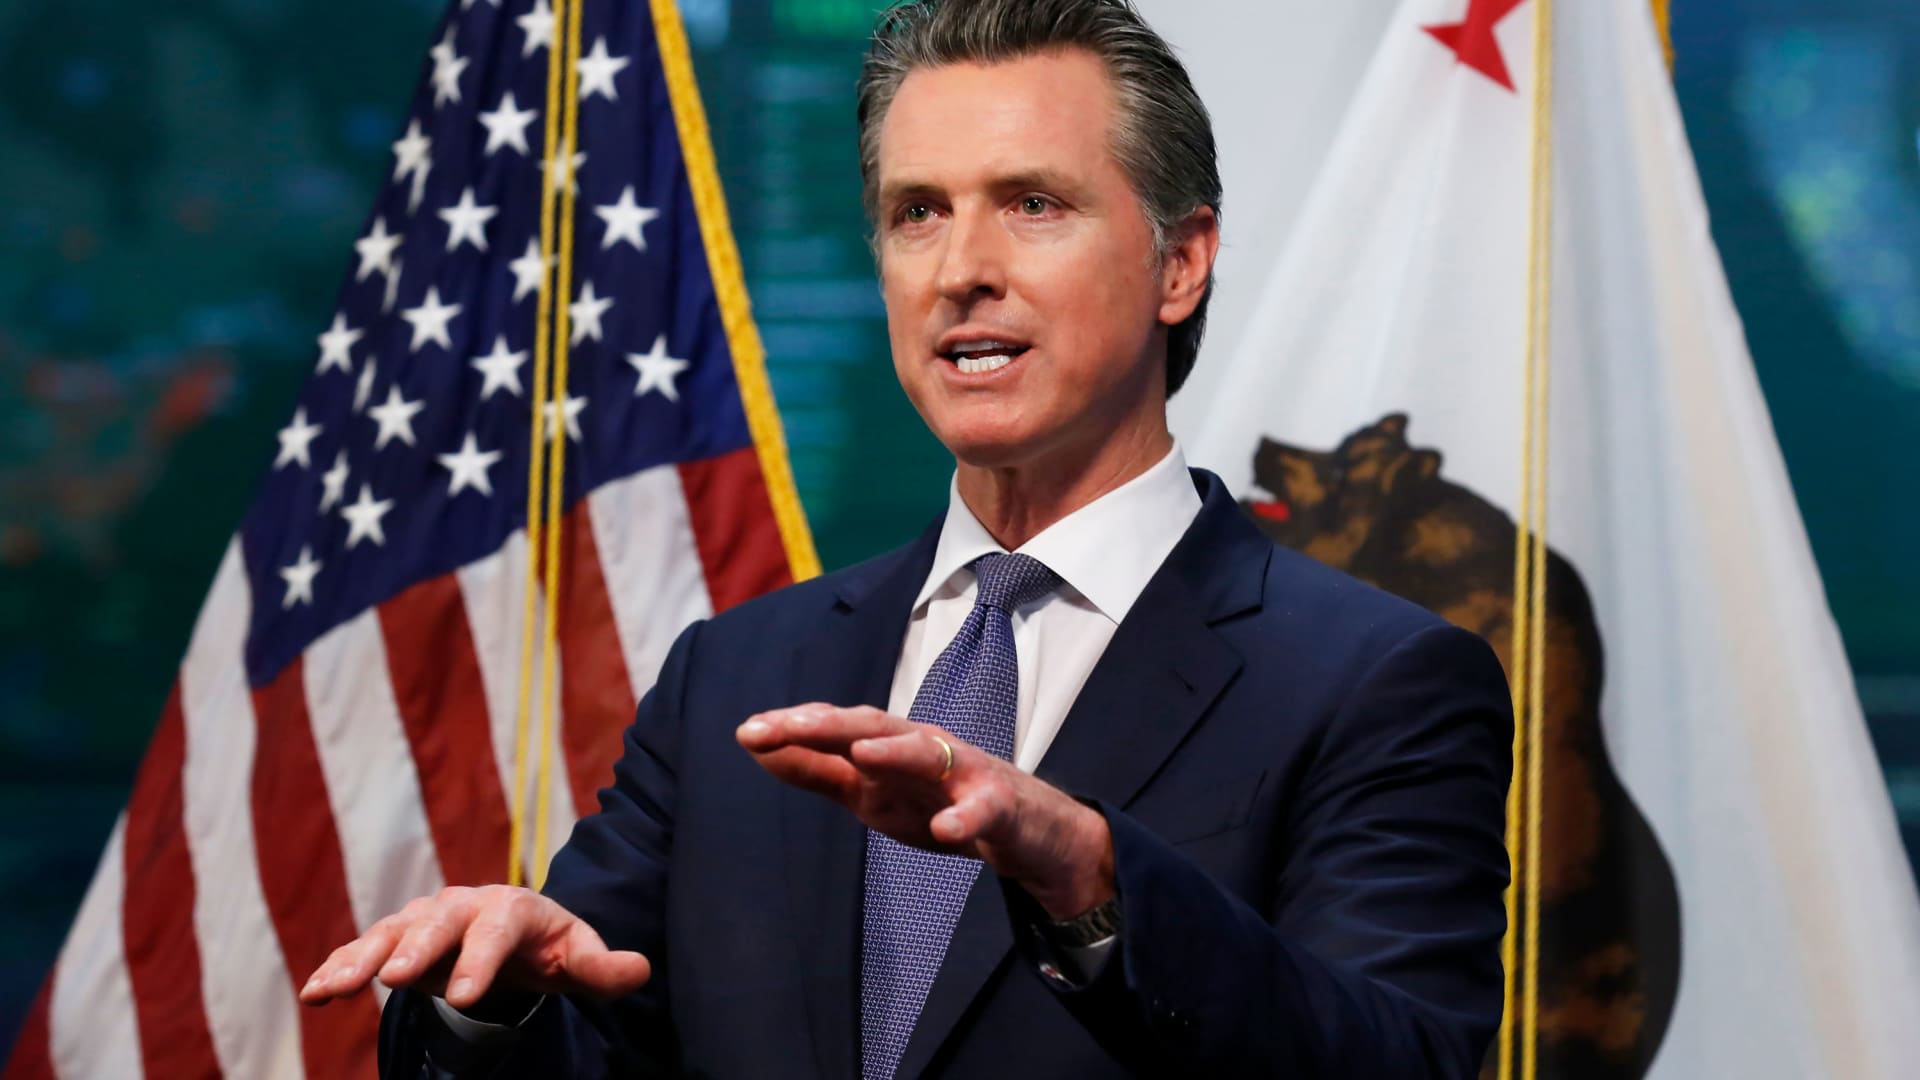 California Gov. Gavin Newsom updates the state's response to the coronavirus at the Governor's Office of Emergency Services in Rancho Cordova, Calif., Monday, March 23, 2020.